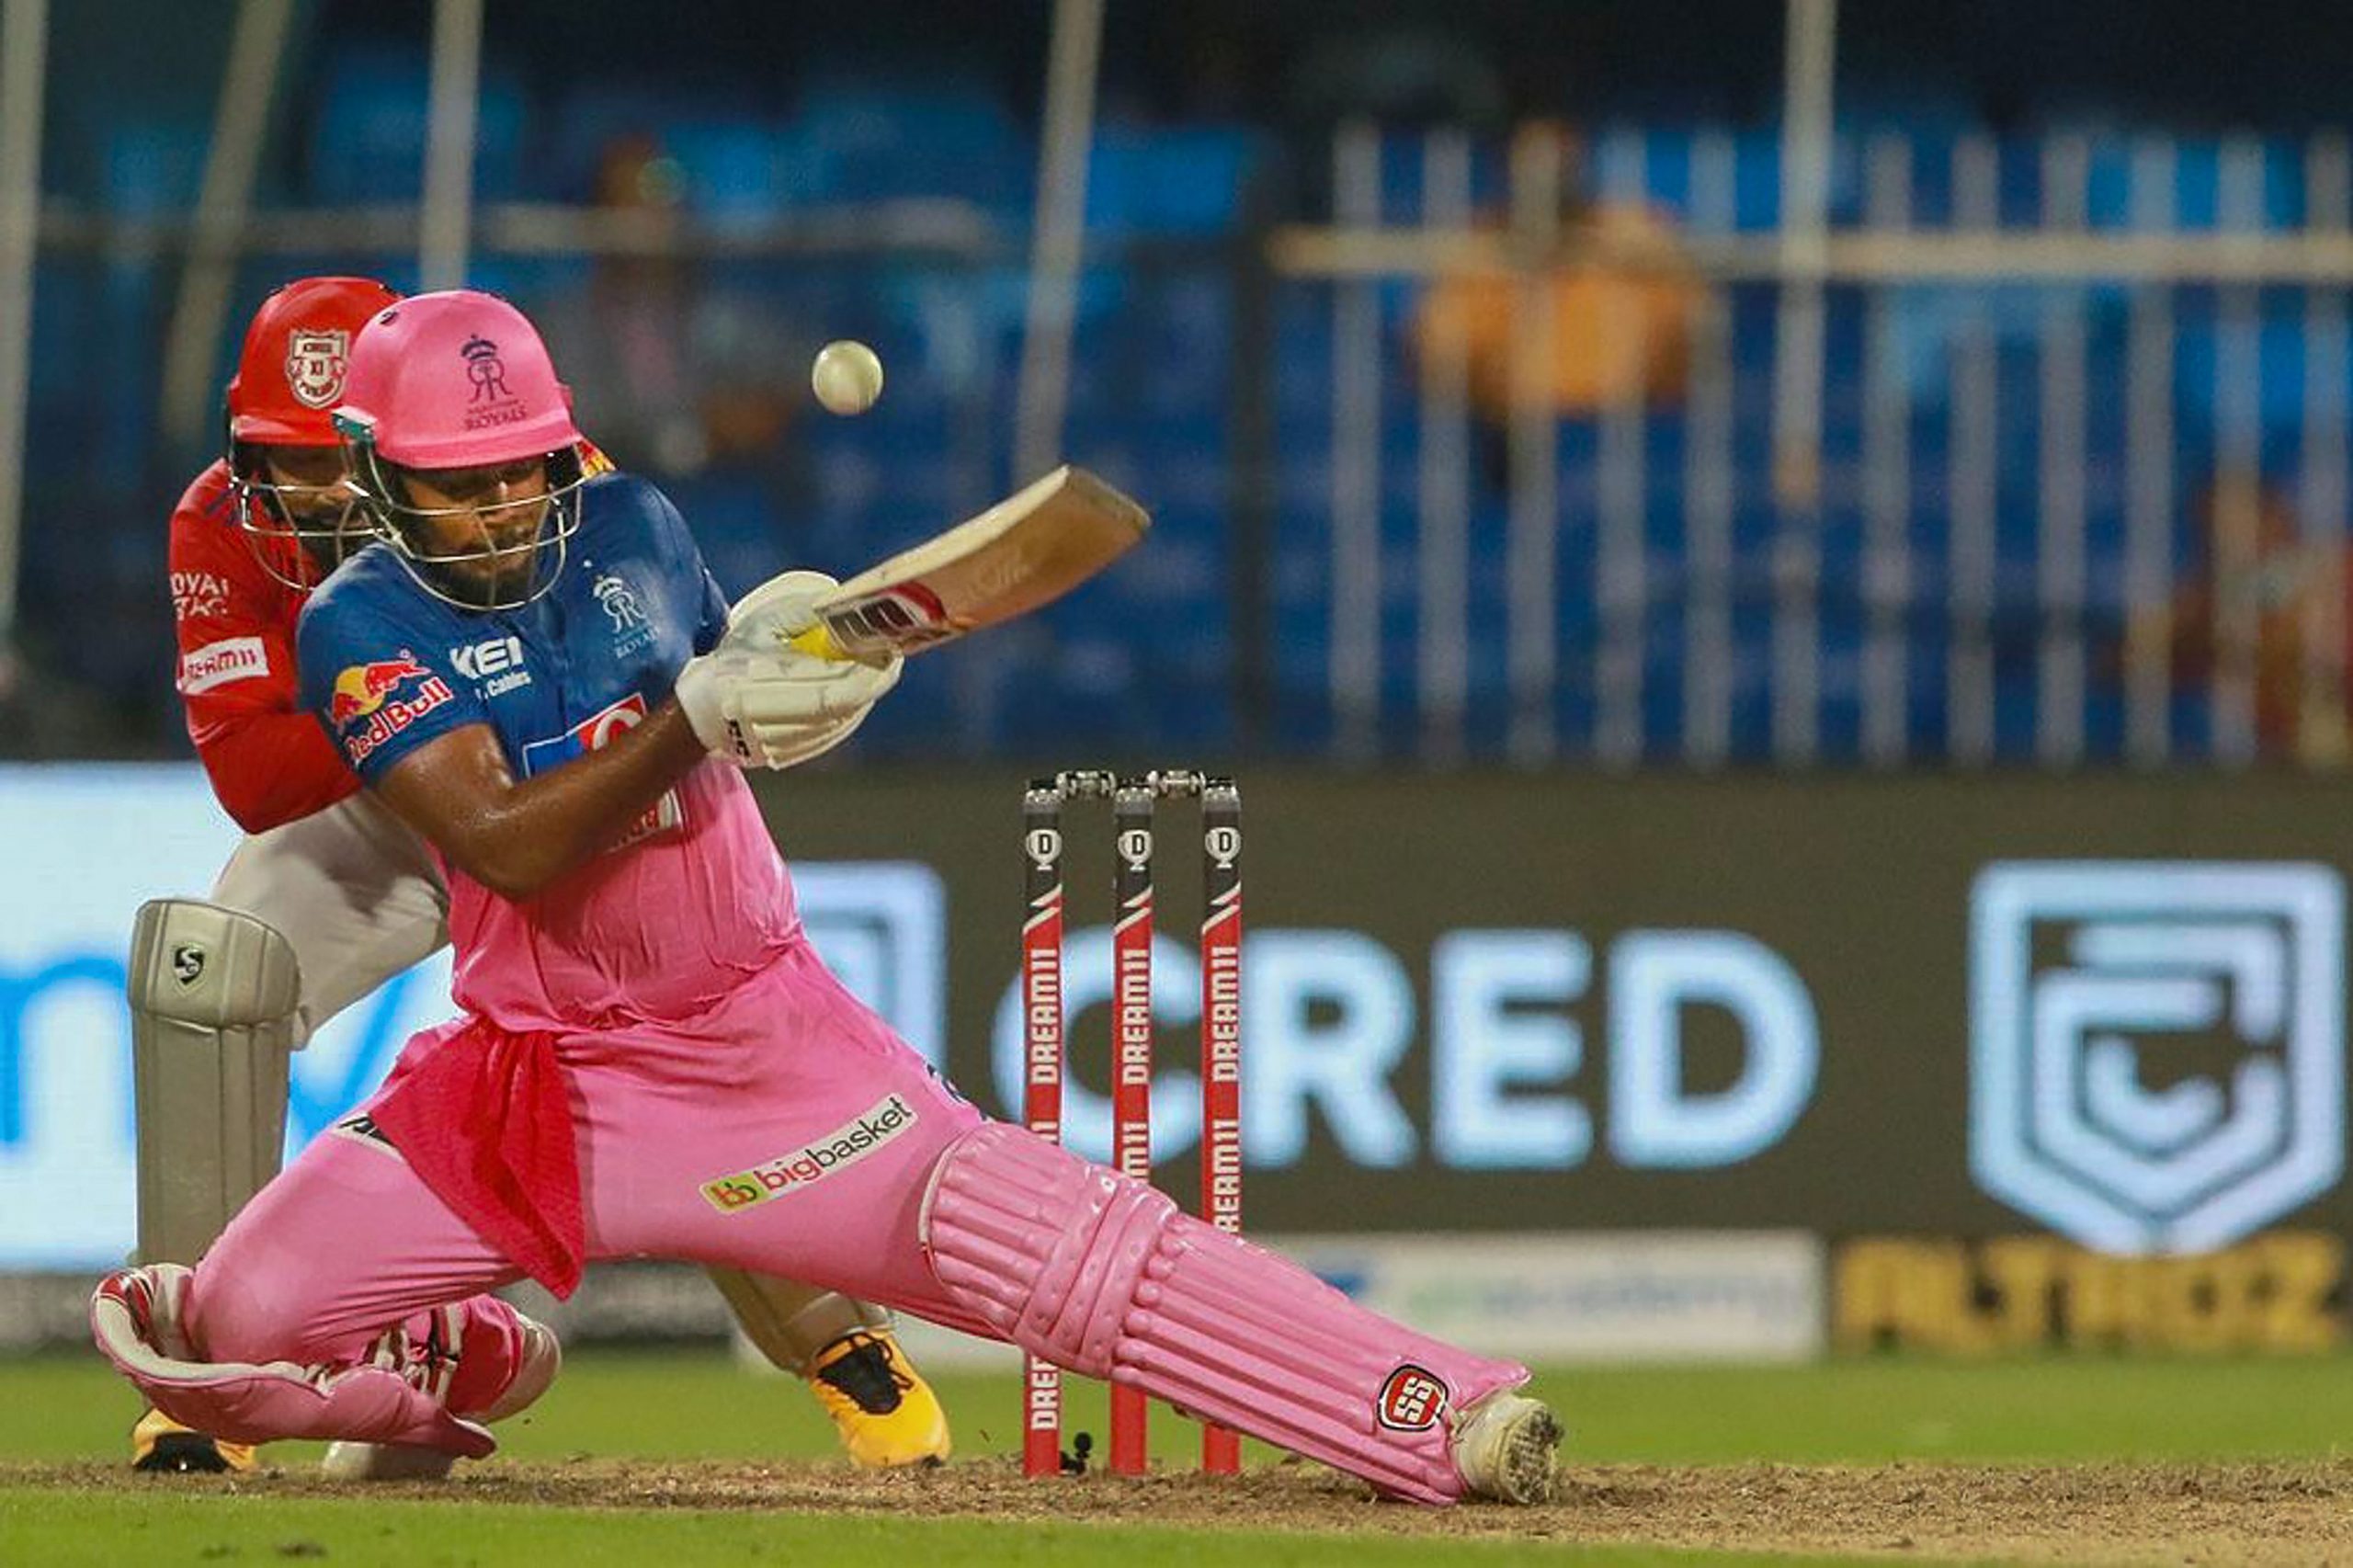 Rajasthan Royals beat Kings XI Punjab by 4 wickets, register highest successful chase